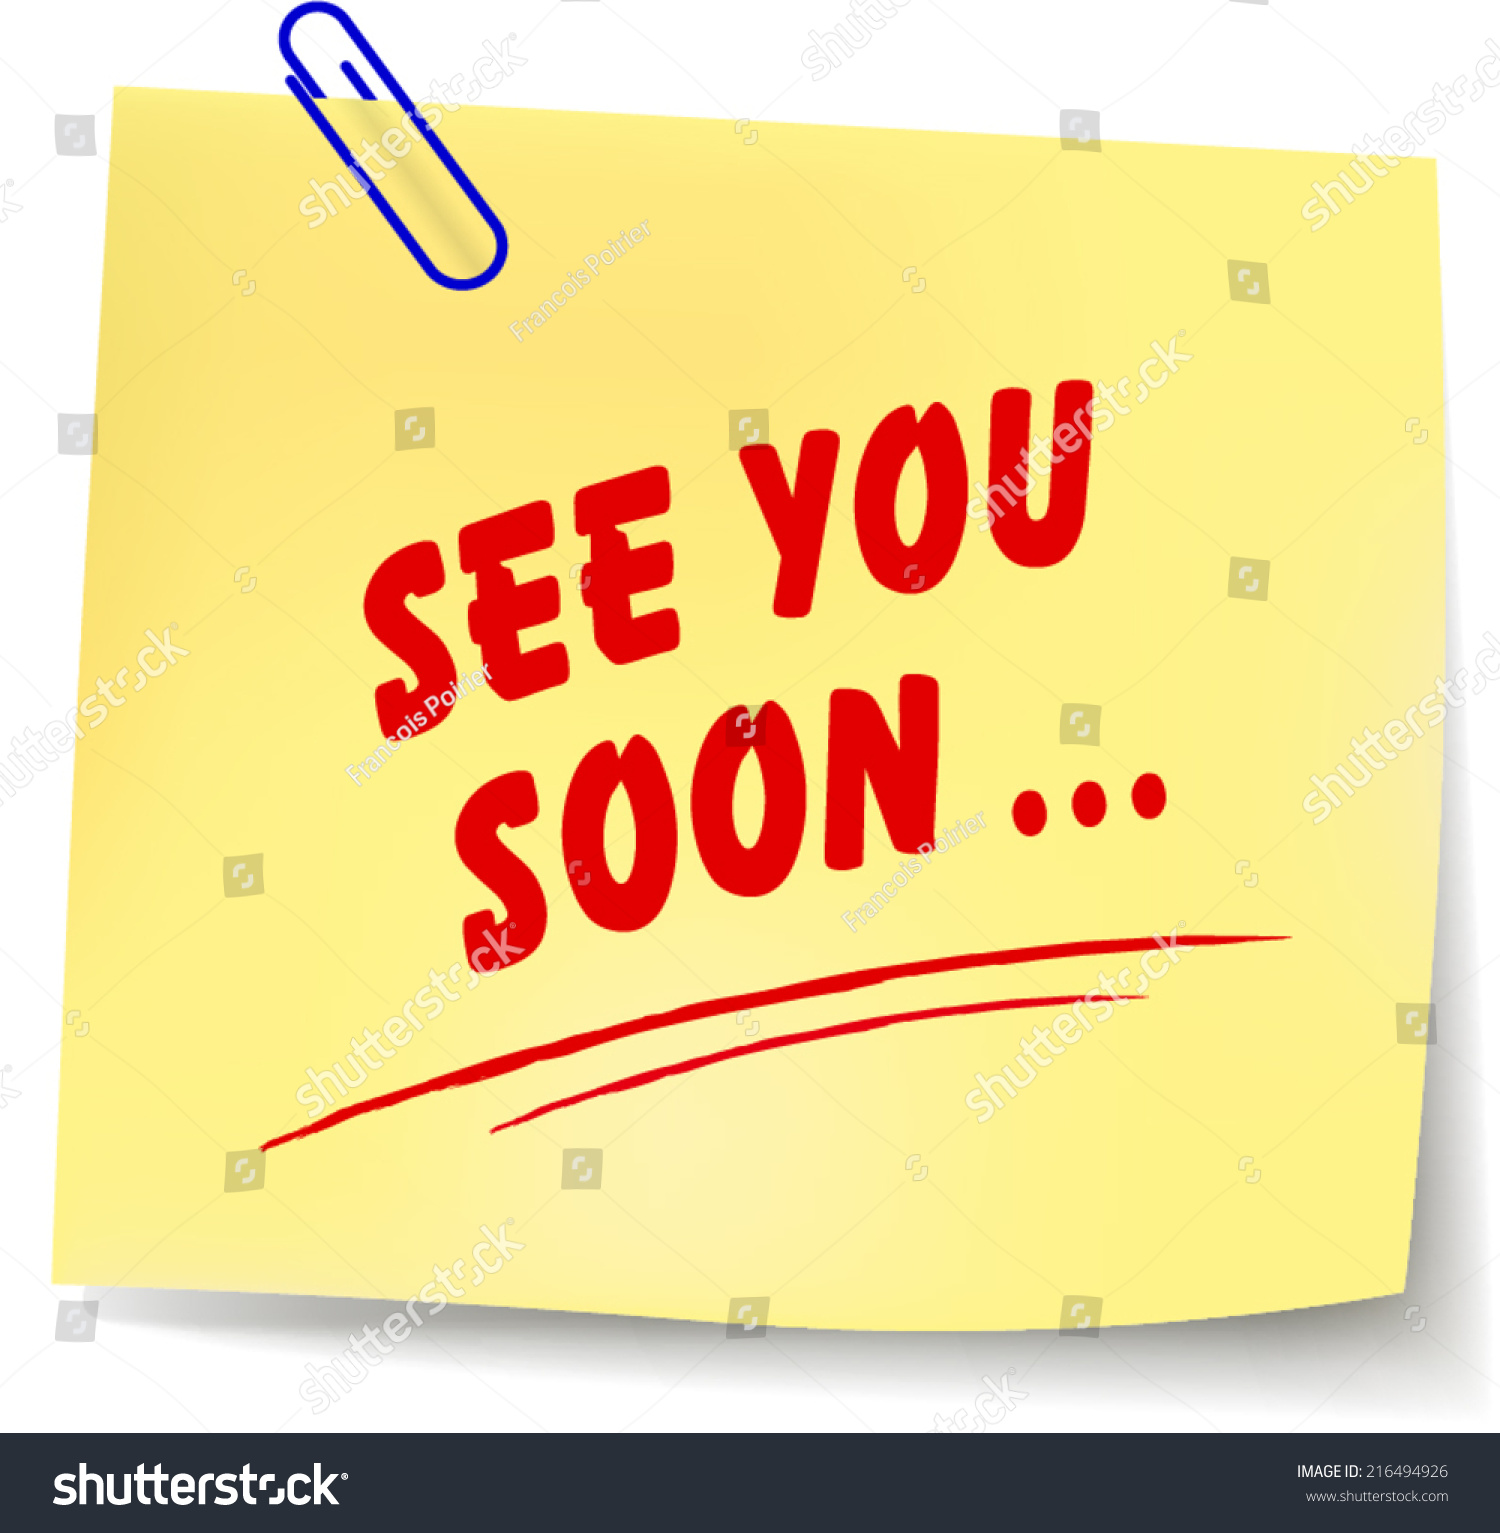 Vector Illustration Of See You Soon Yellow Note On White ...